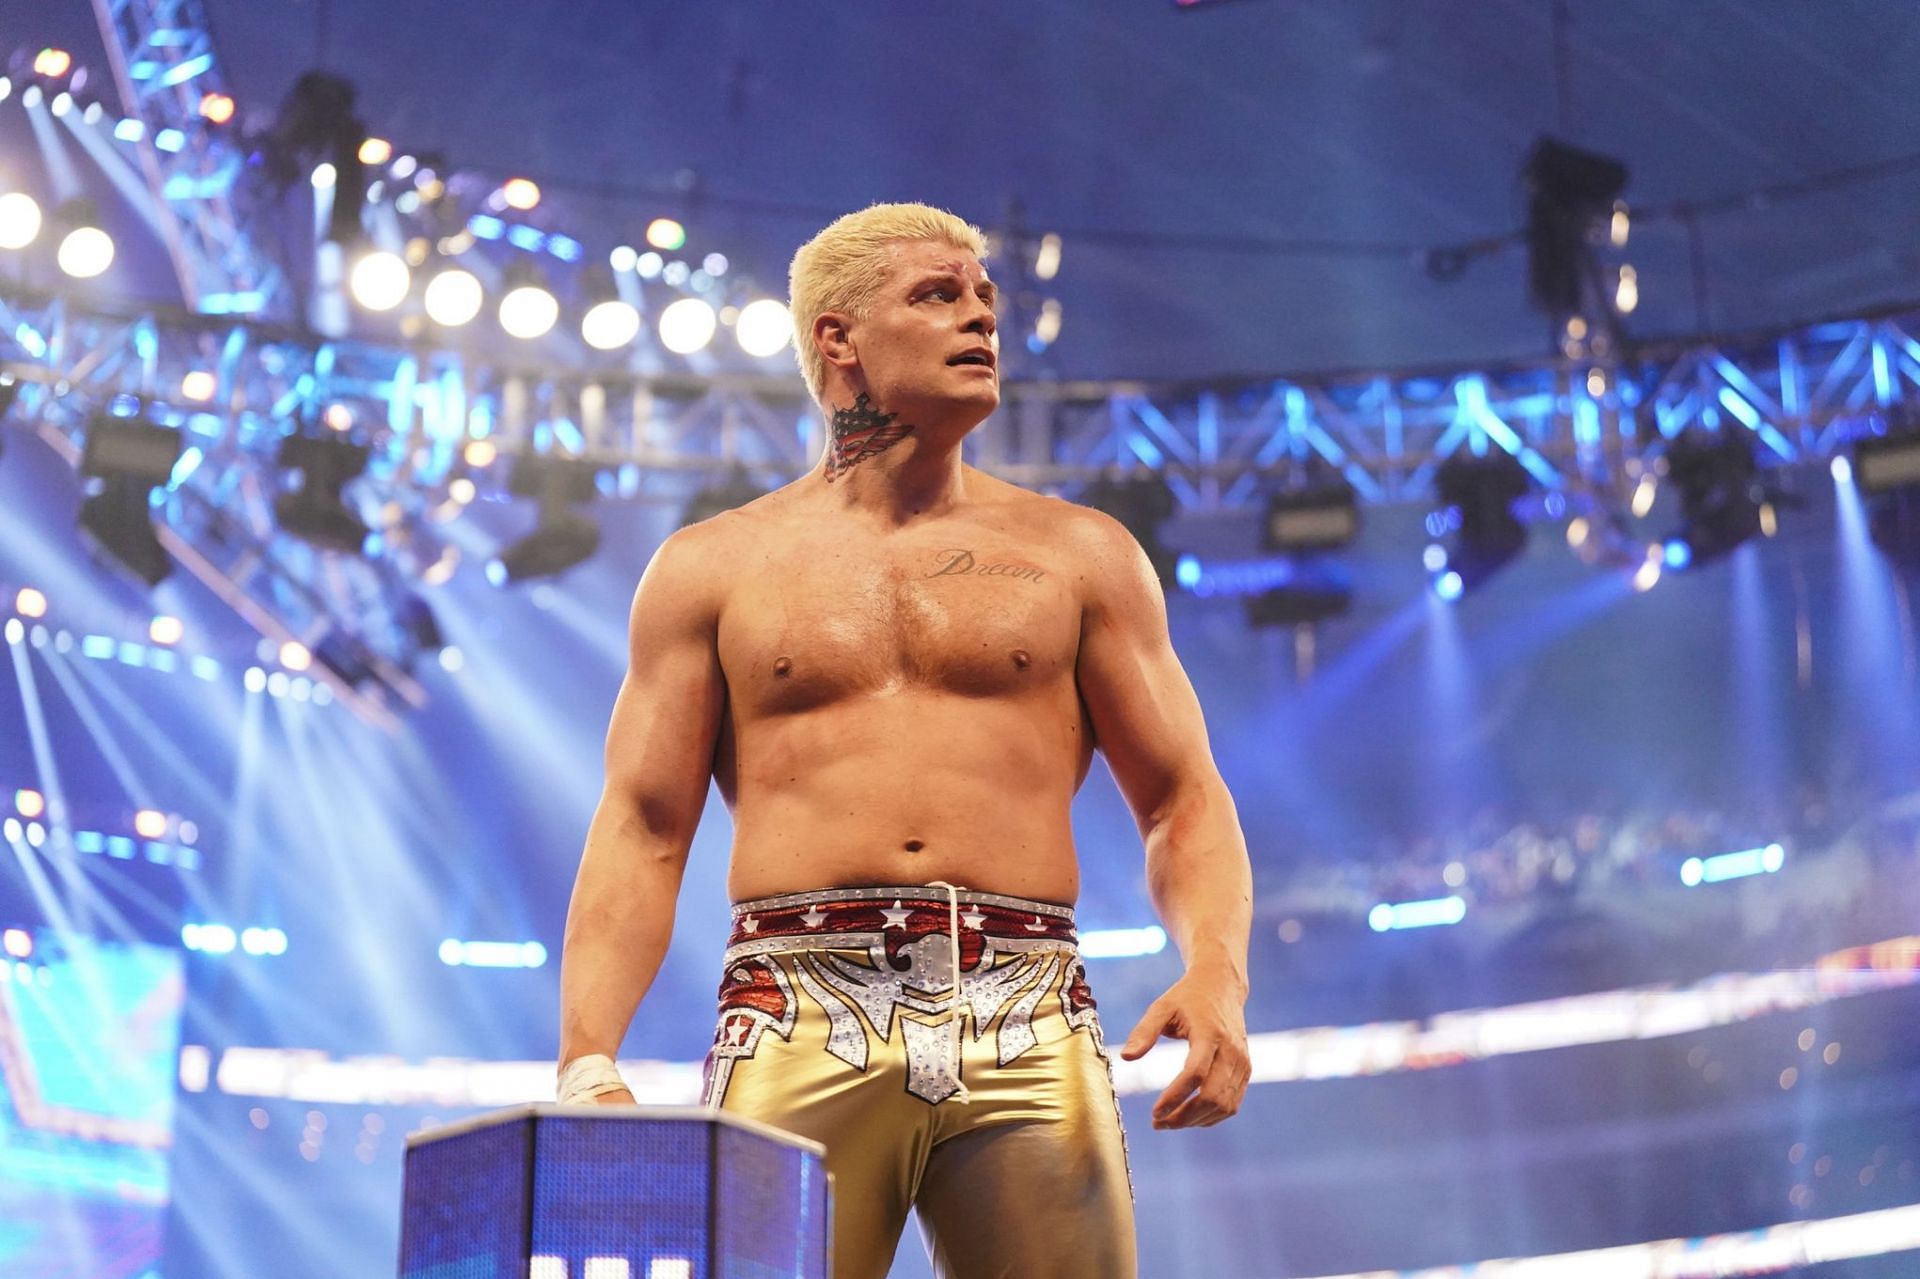 Cody Rhodes is going to challenge Theory for the US Championship